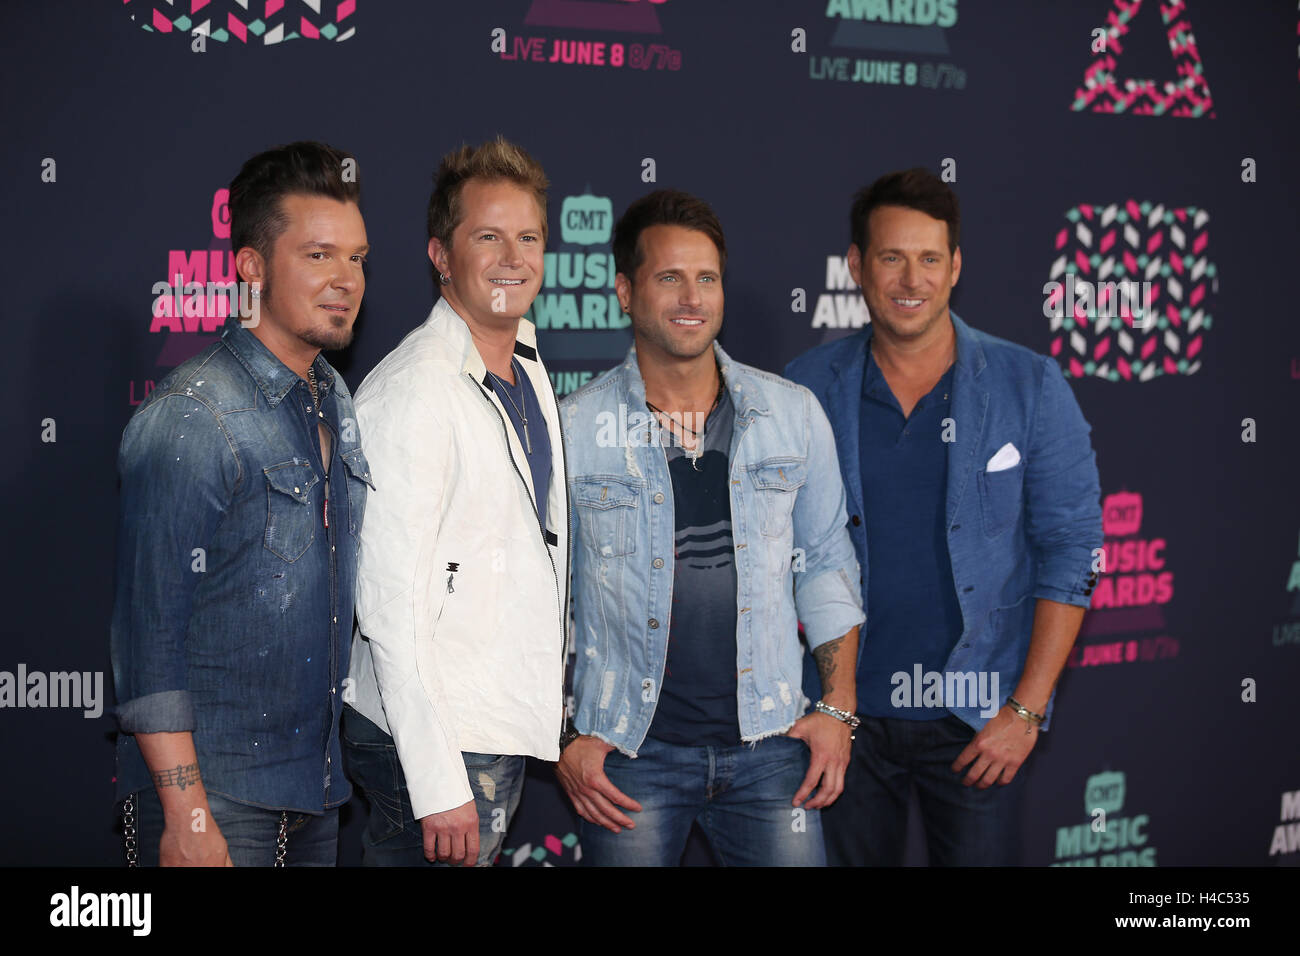 Parmalee walks the red carpet at the CMT Music Awards at Bridgestone Arena on June 8th, 2016 in Nashville, TN. Stock Photo